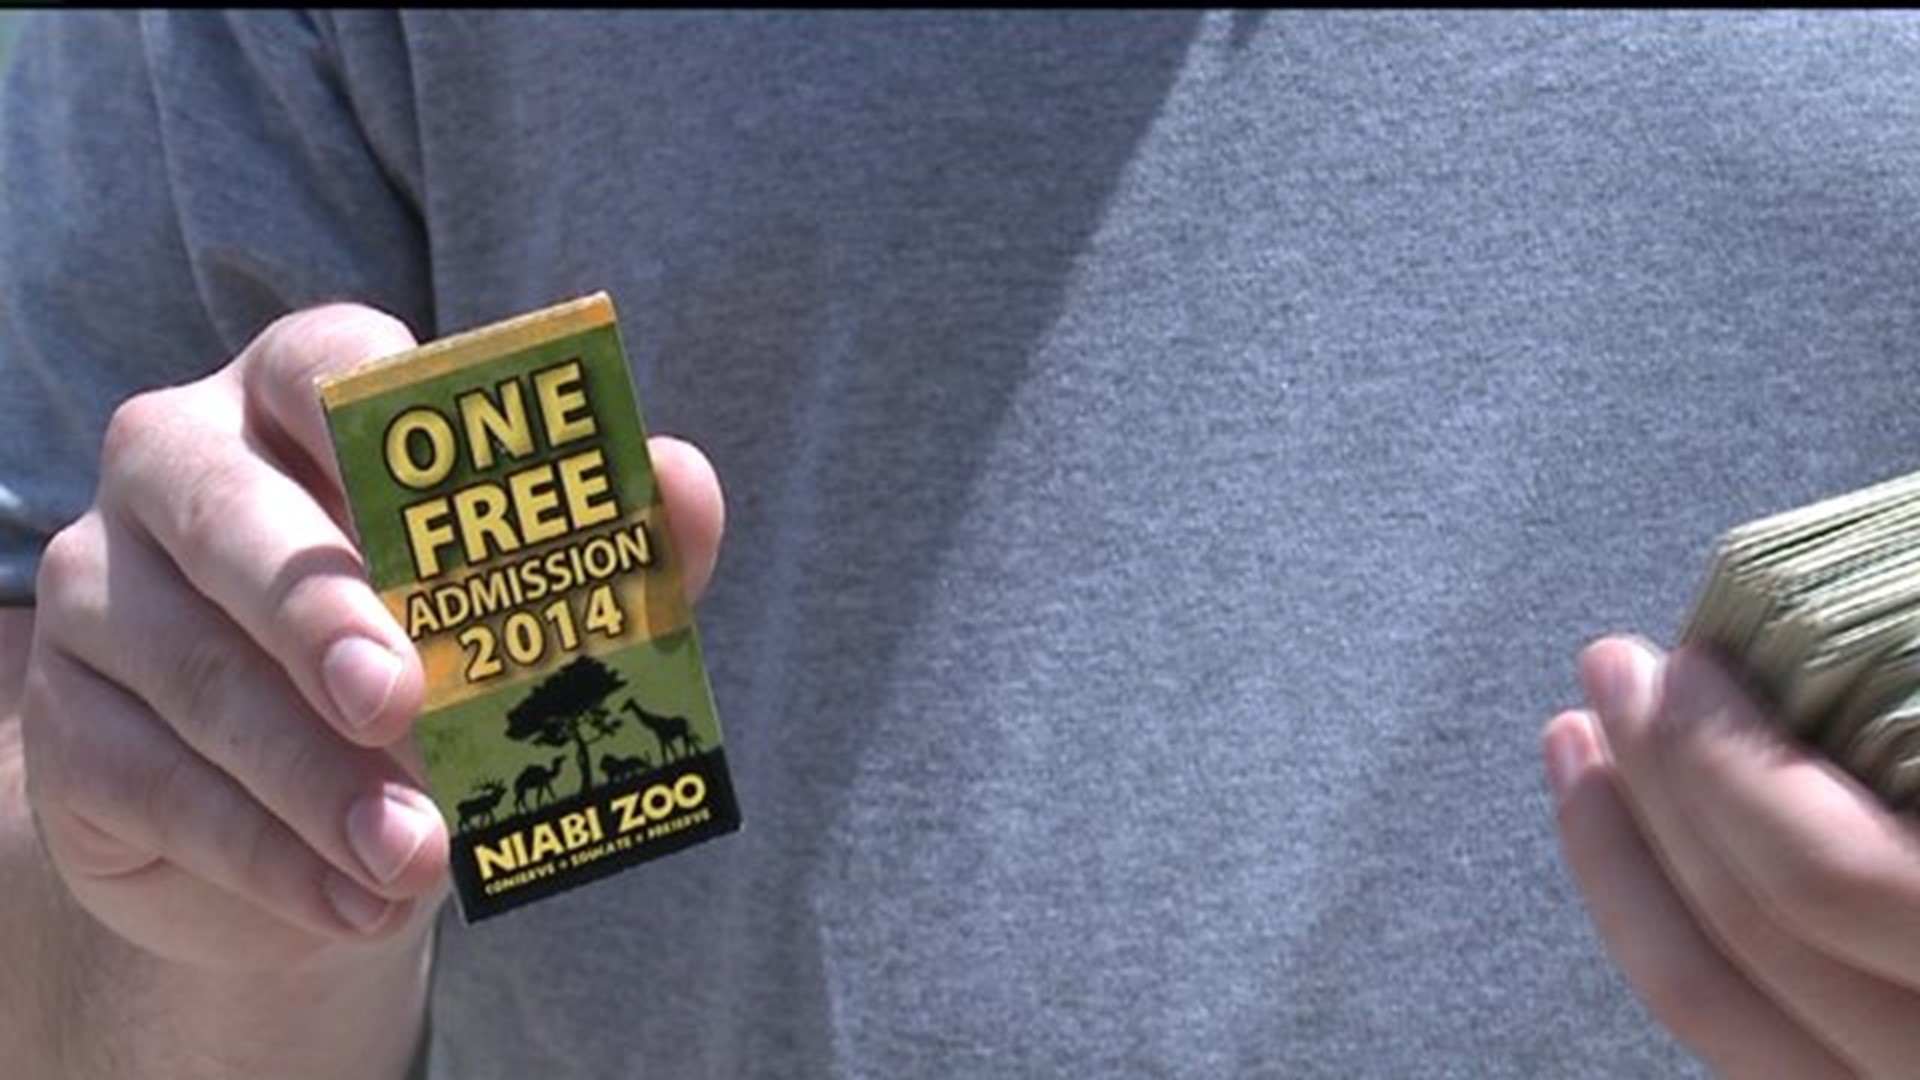 Zoo director clarifies free passes policy